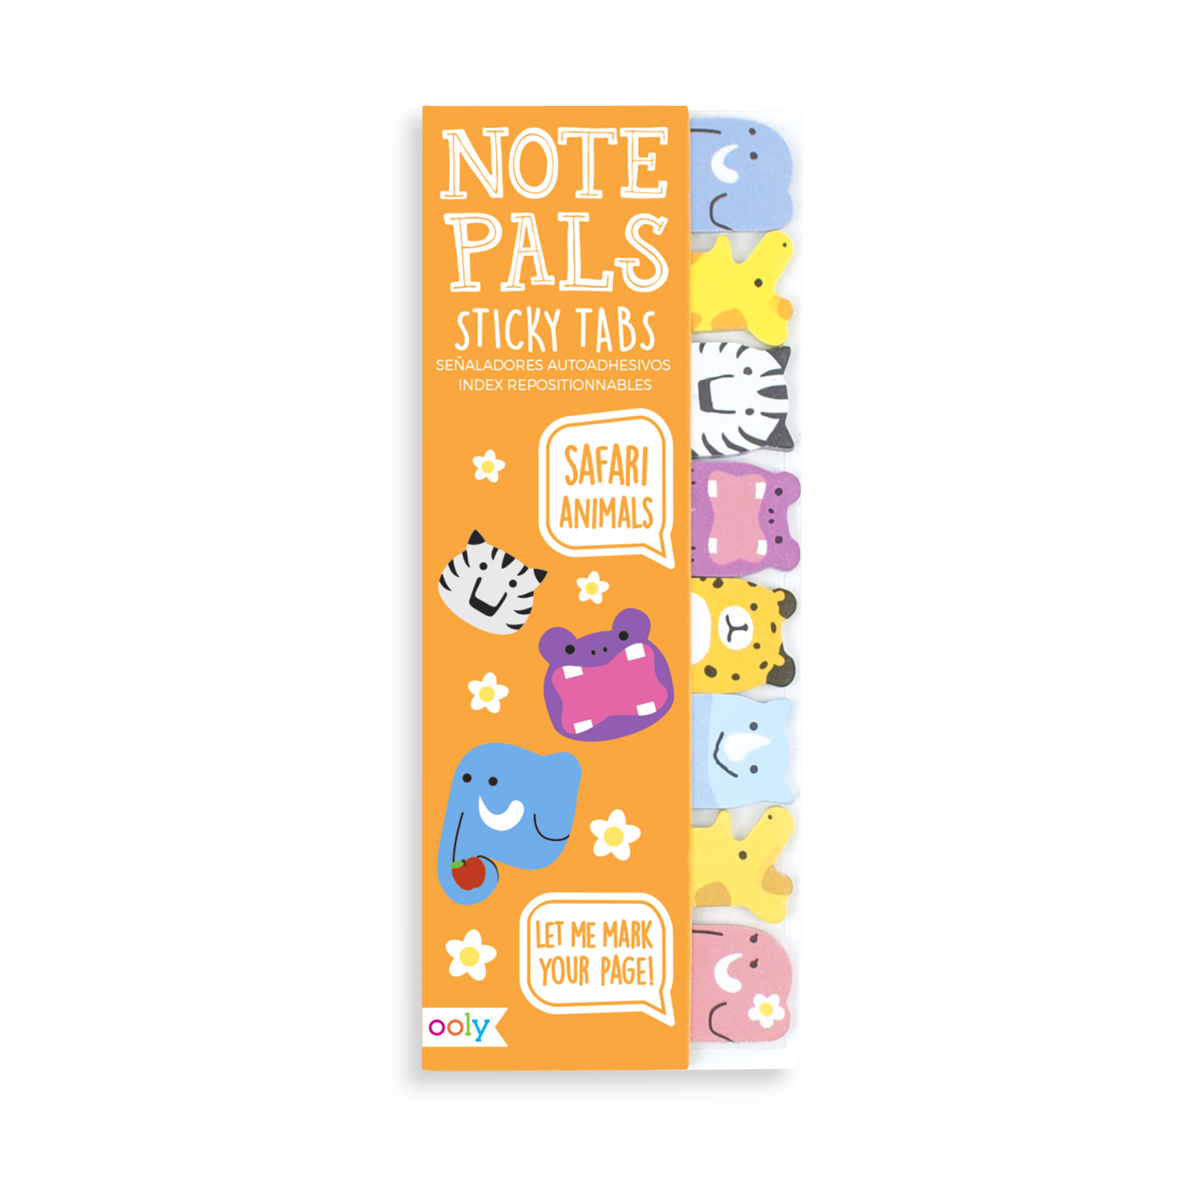 Note Pals Sticky Tabs with safari themed animals